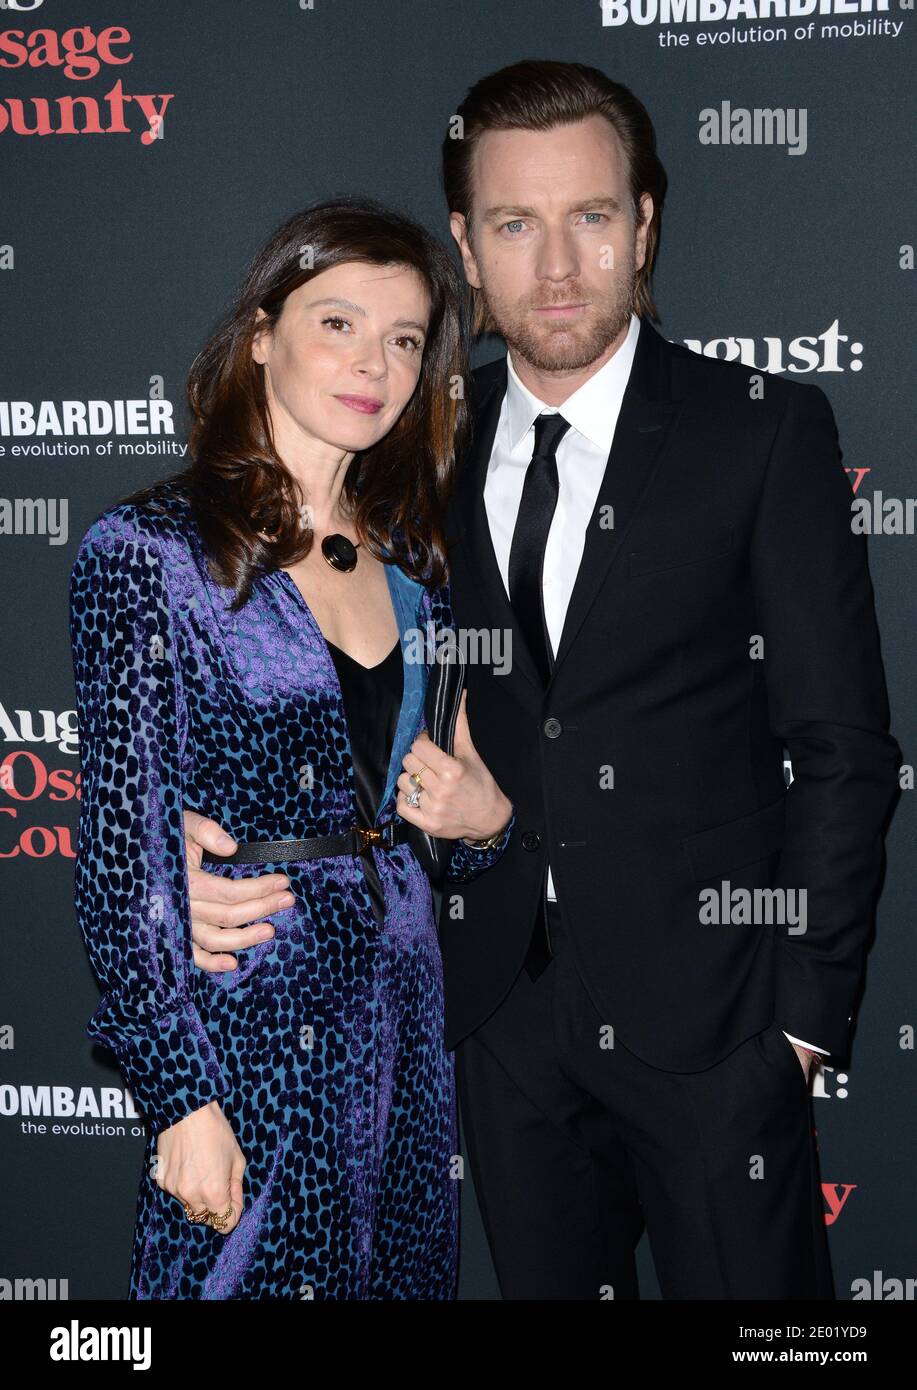 Ewan McGregor and Eve Mavrakis arrive at the premiere of The Weinstein Company's 'August: Osage County' at Regal Cinemas L.A. Live in Los Angeles, CA, USA on December 16, 2013. Photo by Lionel Hahn/ABACAPRESS.COM Stock Photo